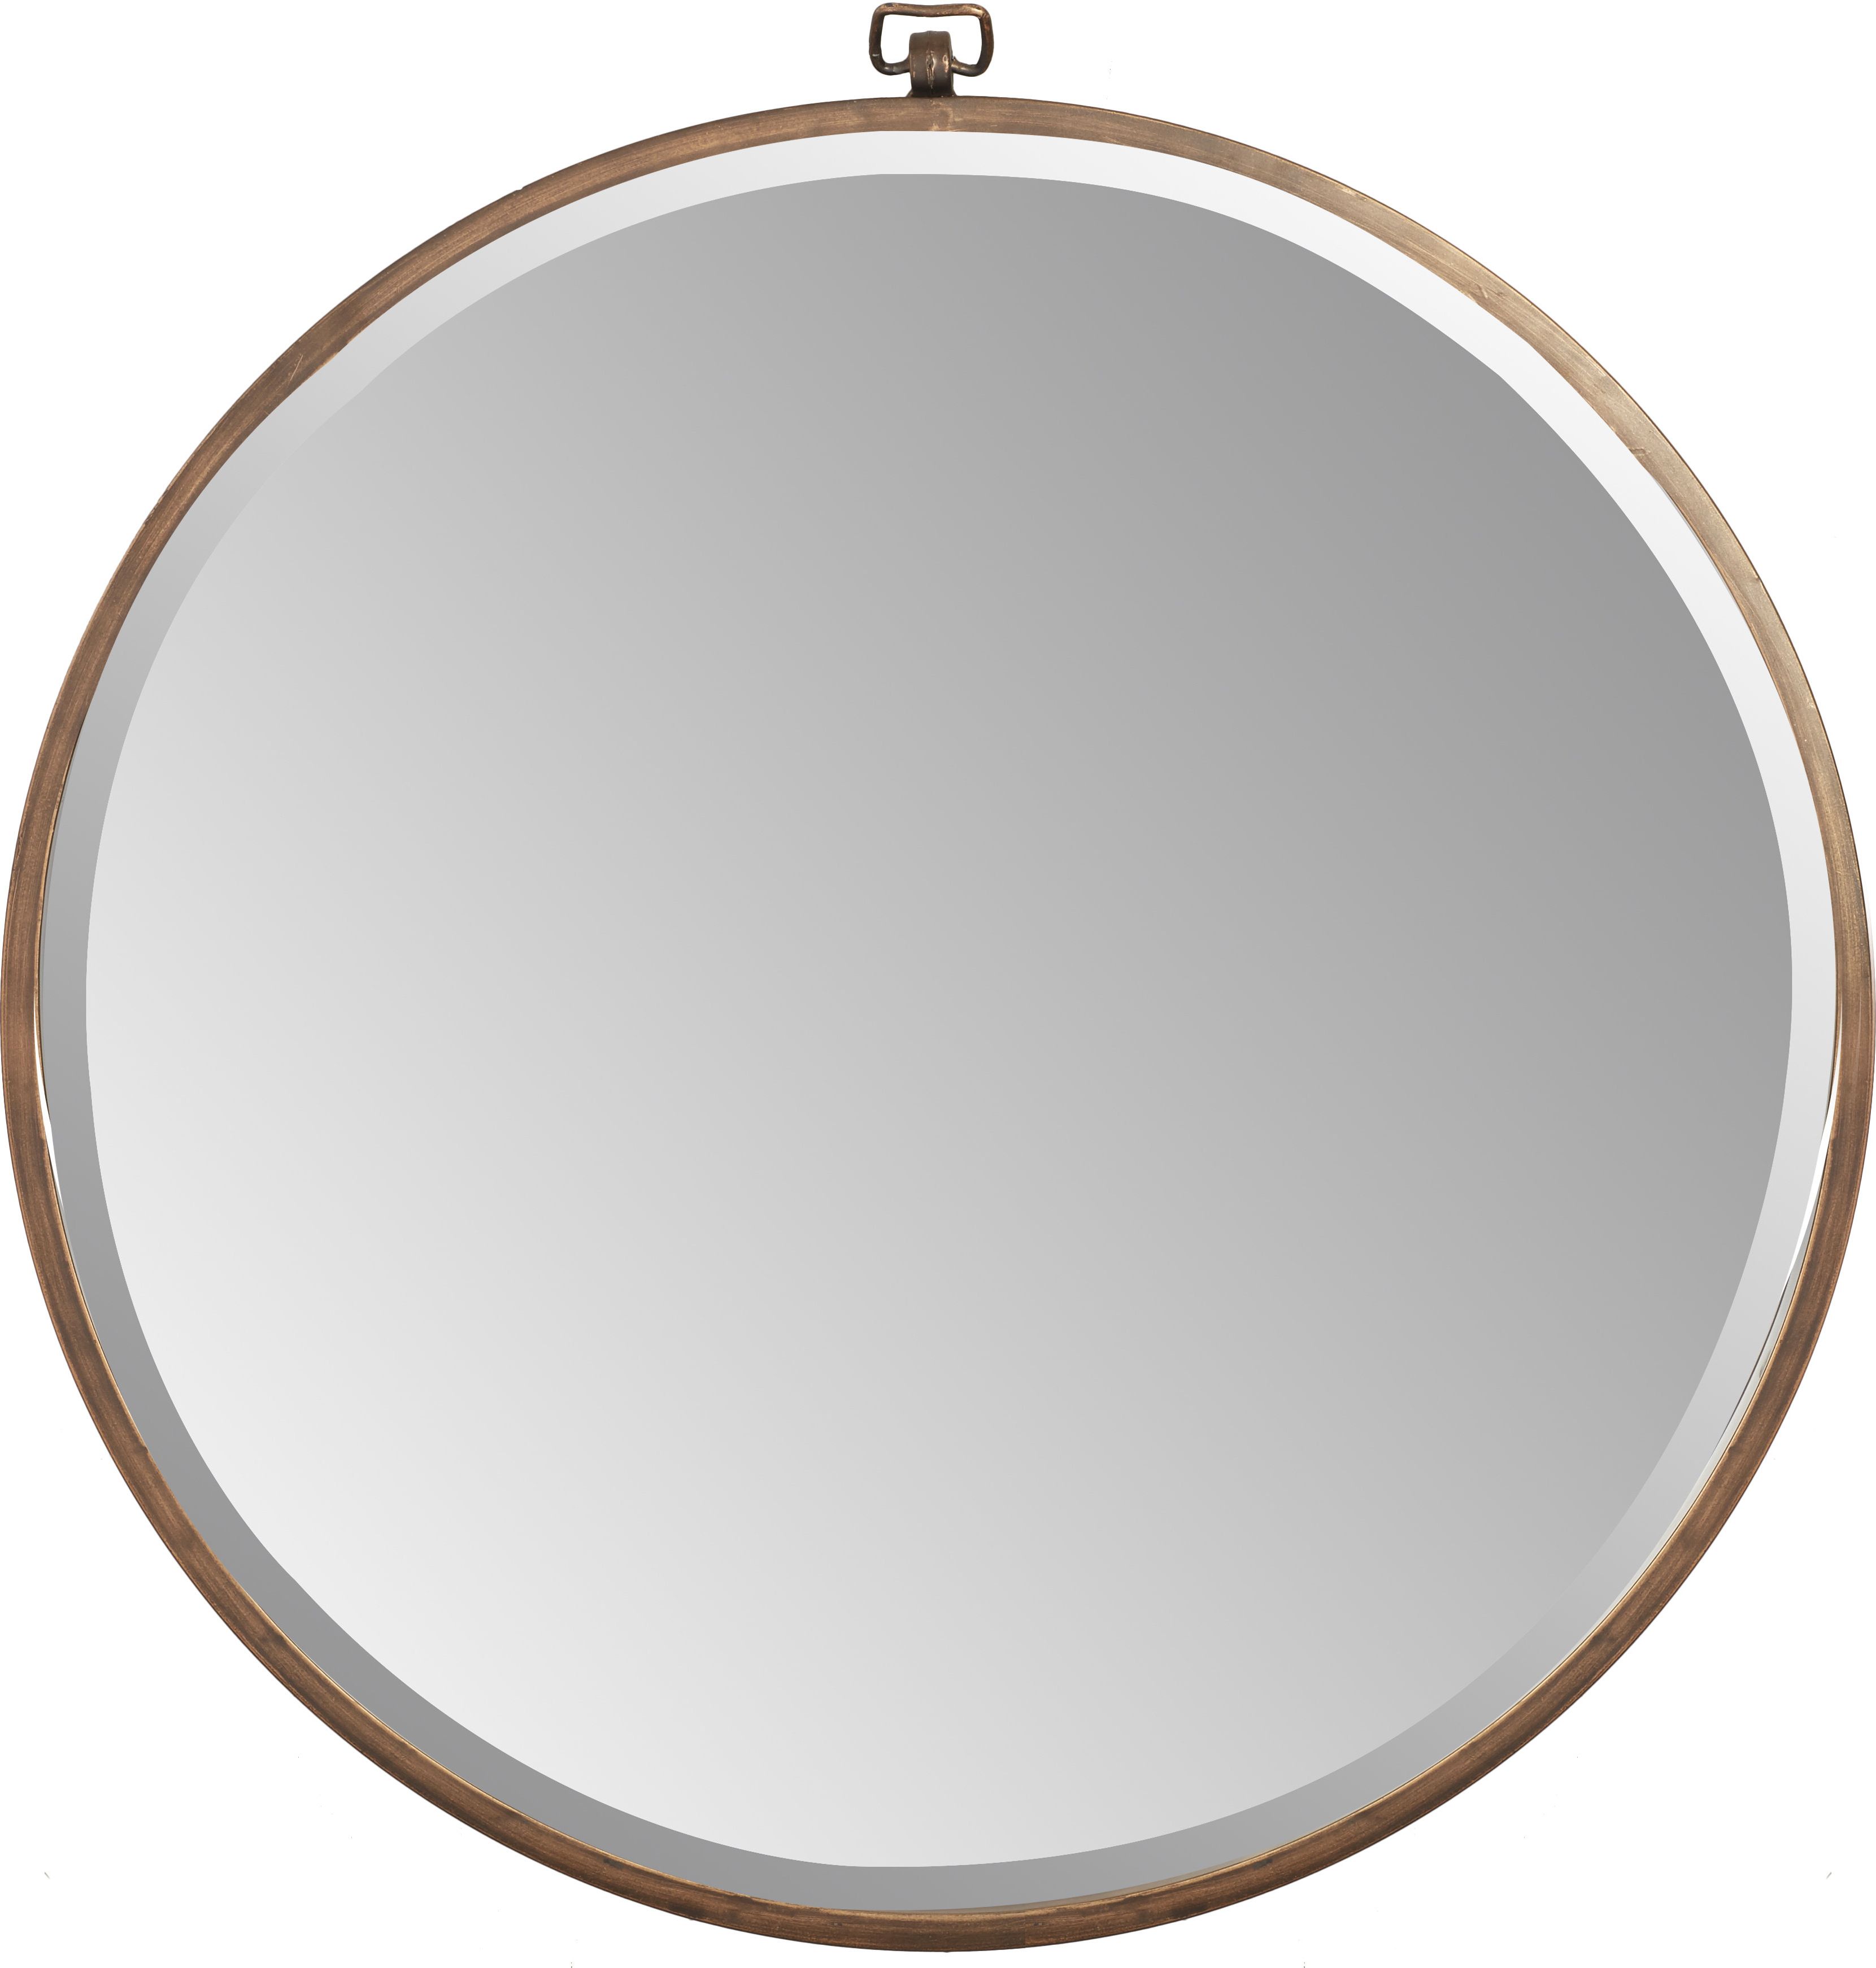 Recent Loftis Modern & Contemporary Accent Wall Mirrors Intended For Minerva Accent Mirror (View 11 of 20)